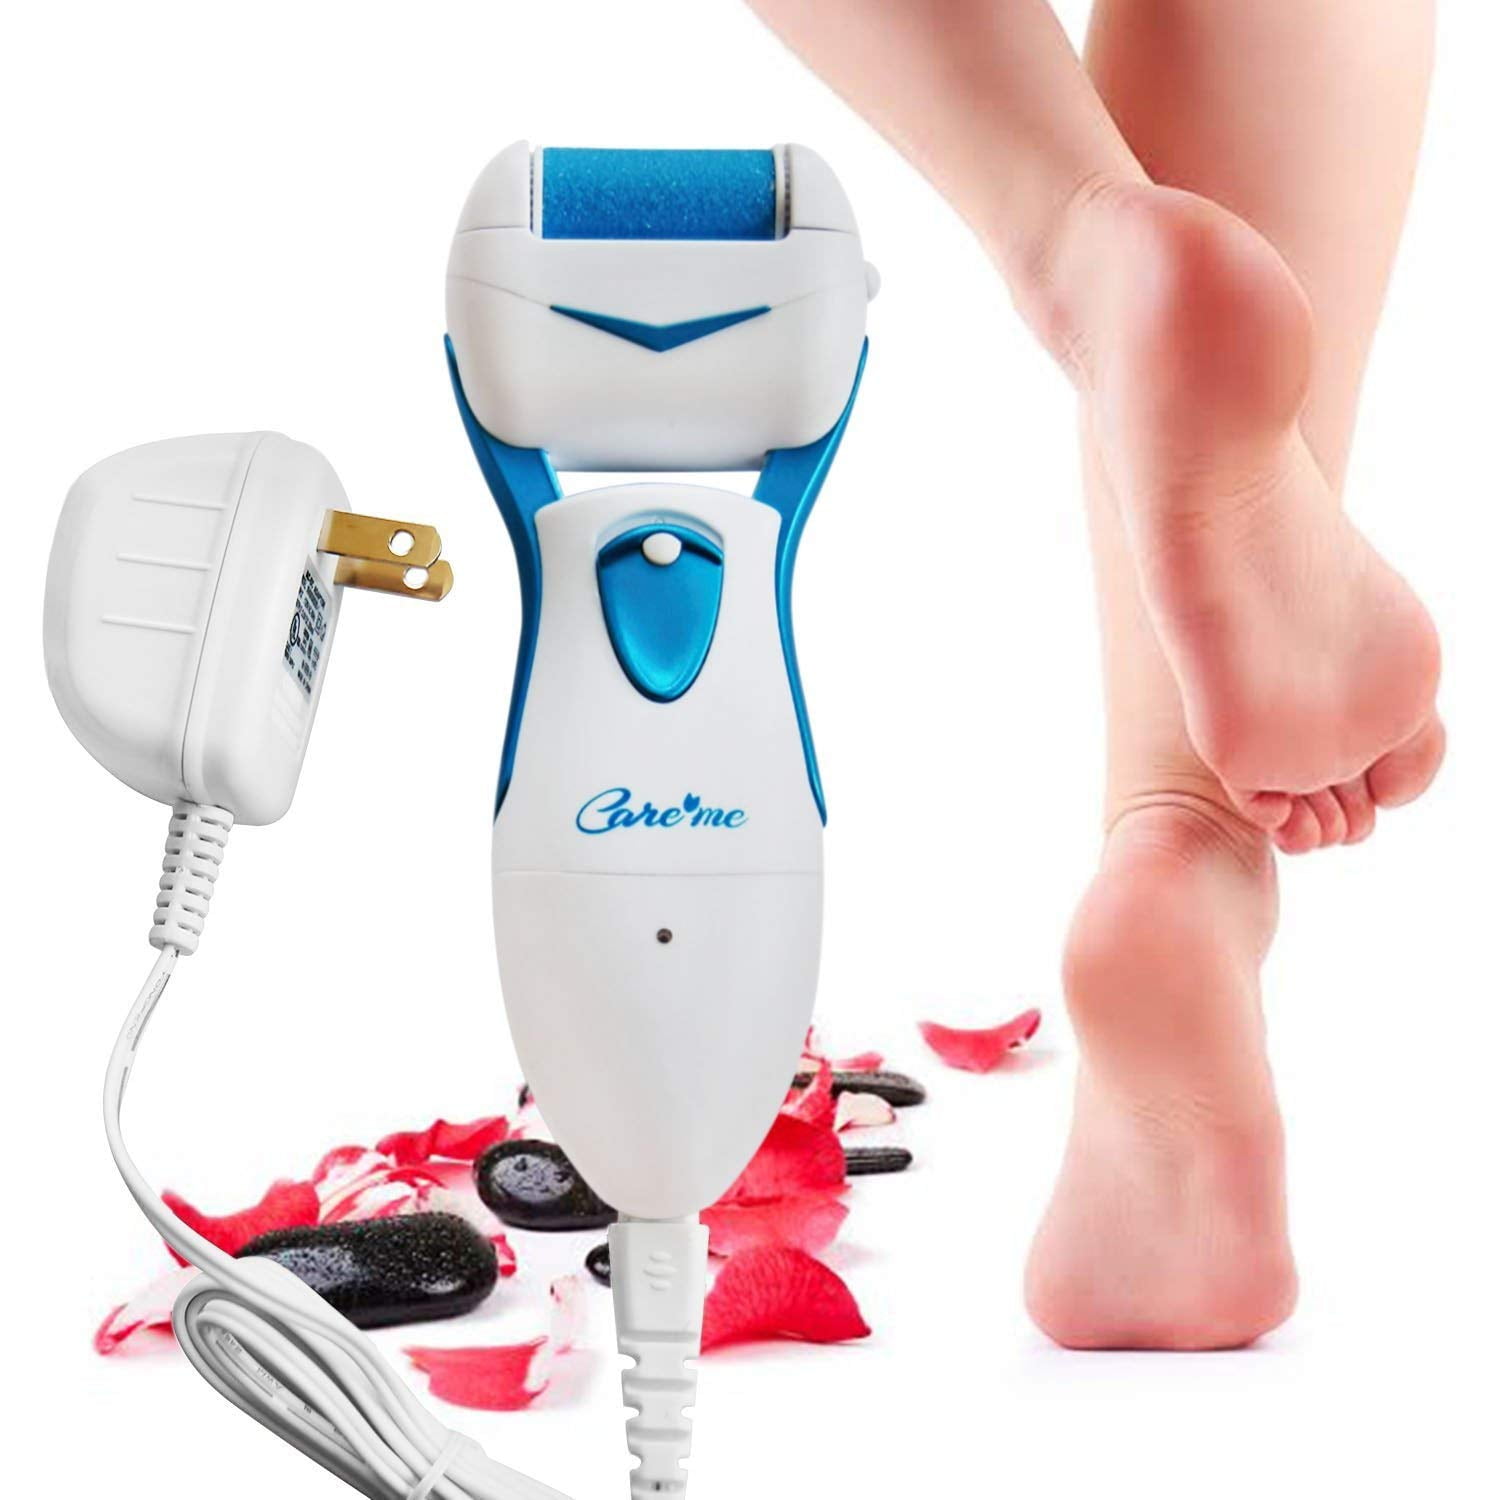 Nuve Smooth Pedicure Wand, Electric Callus Remover for Feet, Rechargeable  Pedicure Tools Foot Care Kit, Pedicure Tools, Pedicure Tools Kit, Feet  Care